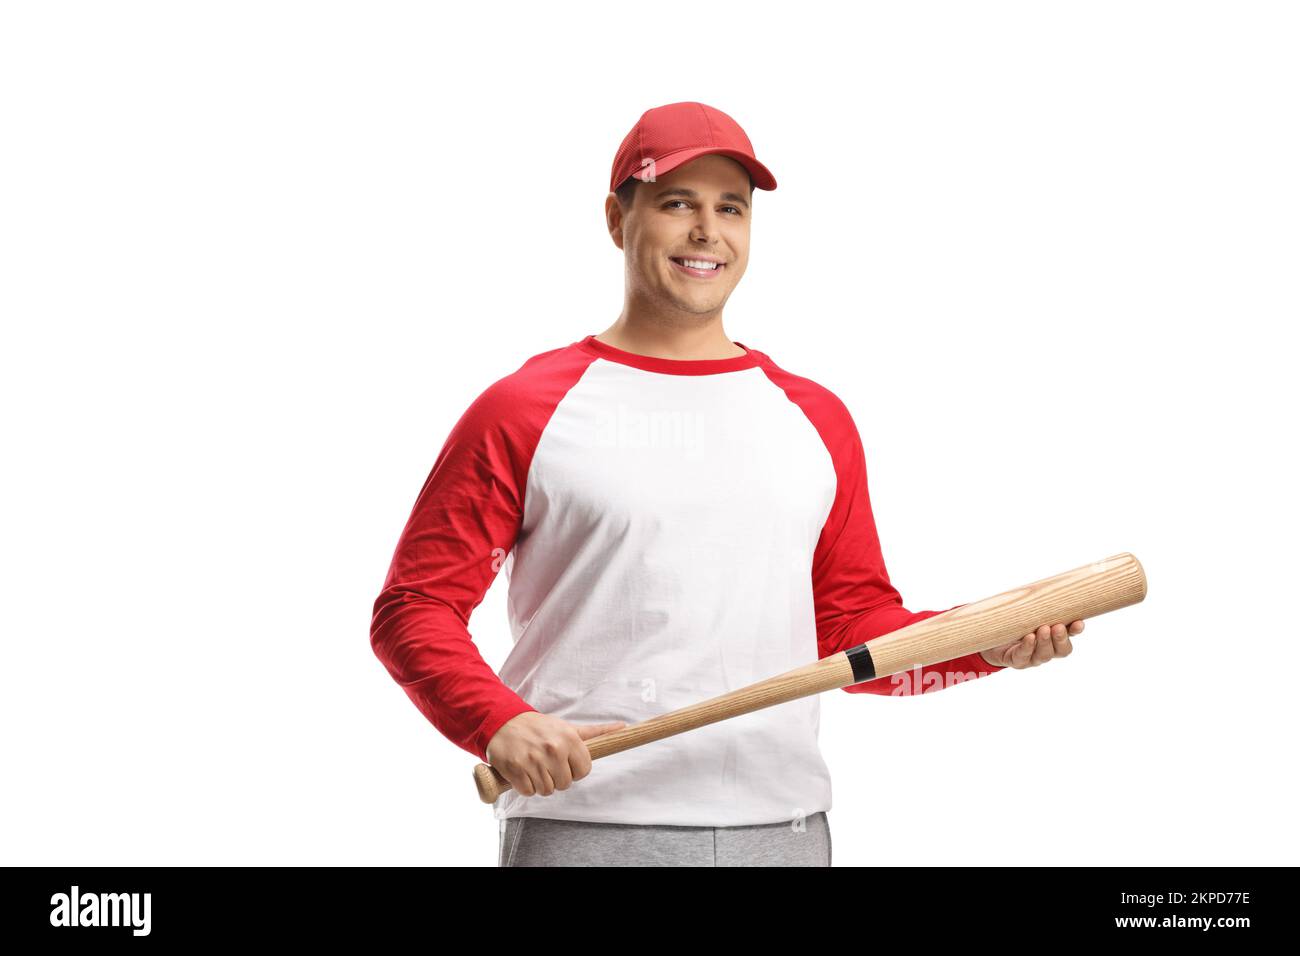 Young man with a baseball bat smiling at camera isolated on white background Stock Photo